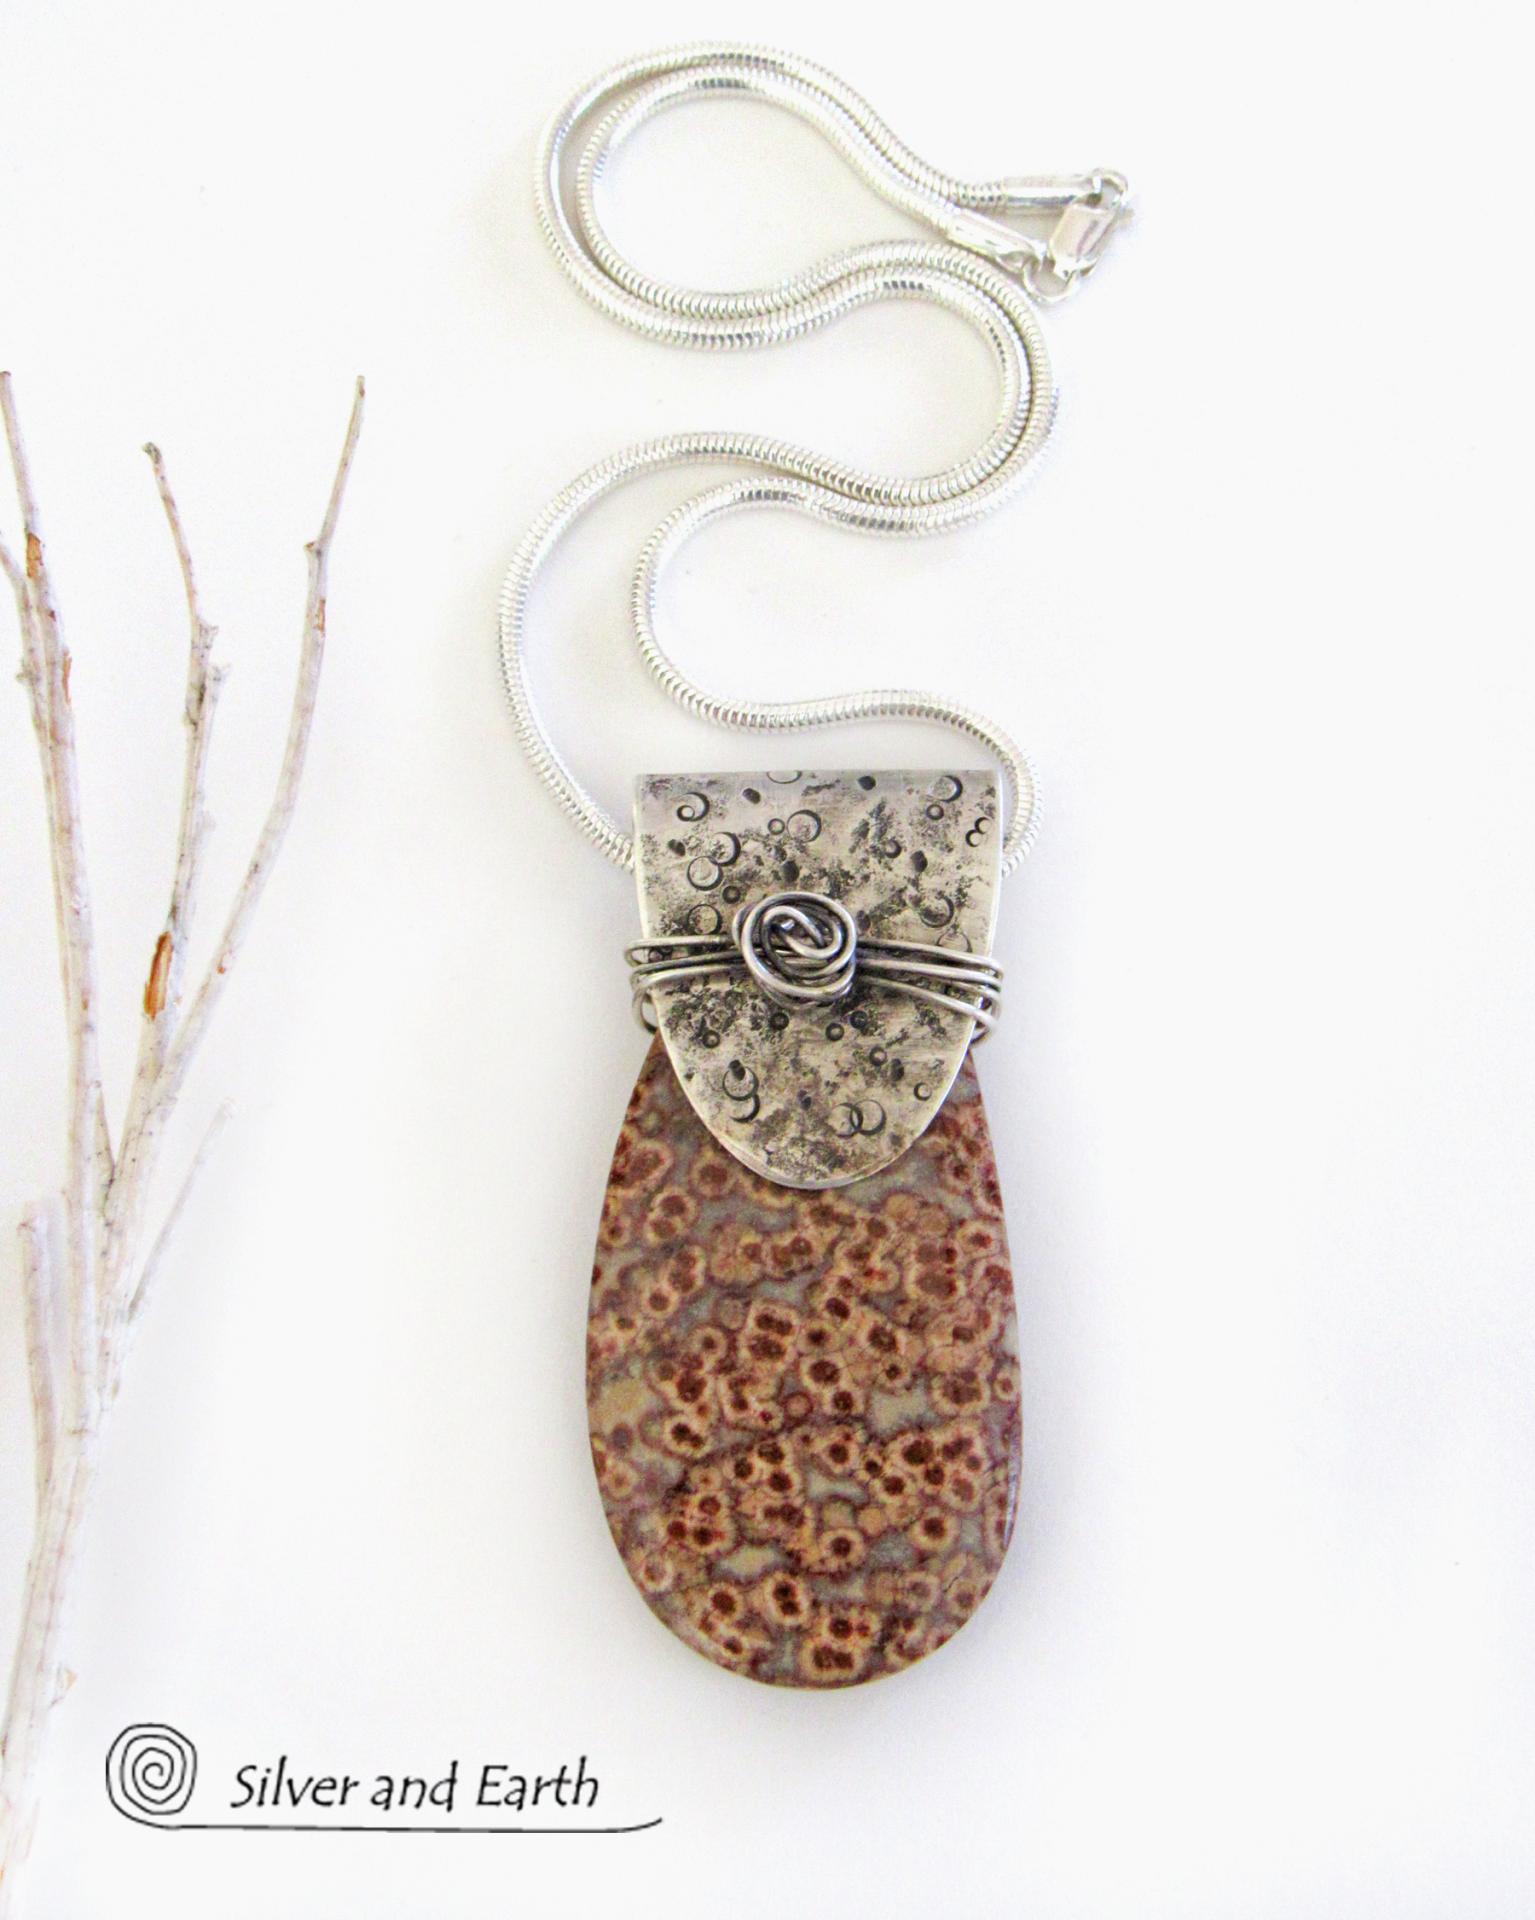 Birdseye Rhyolite Sterling Silver Necklace - One of a Kind Natural Stone Jewelry